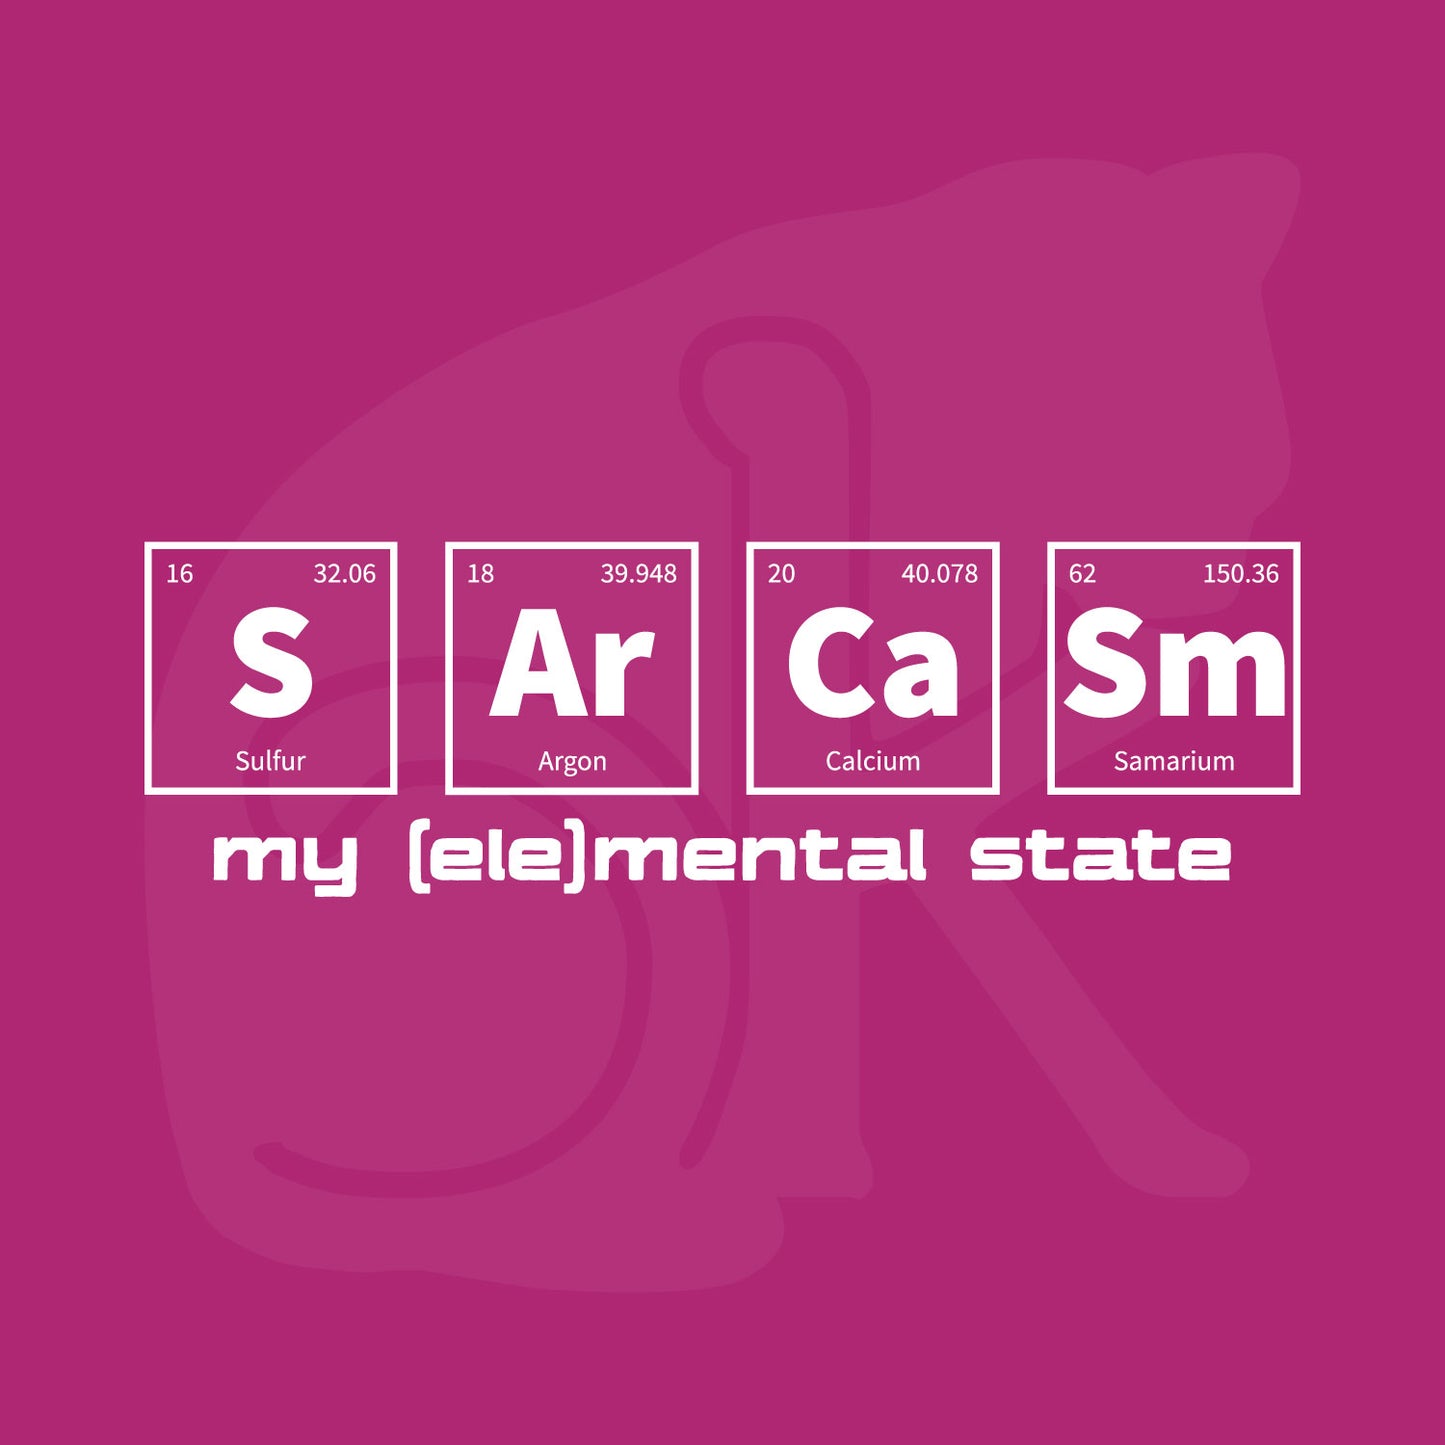 Standalone watermarked graphic of periodic table of elements symbols for Sulfur (S), Argon (Ar), Calcium (Ca), and Samarium (Sm) and text "my (ele)mental state"